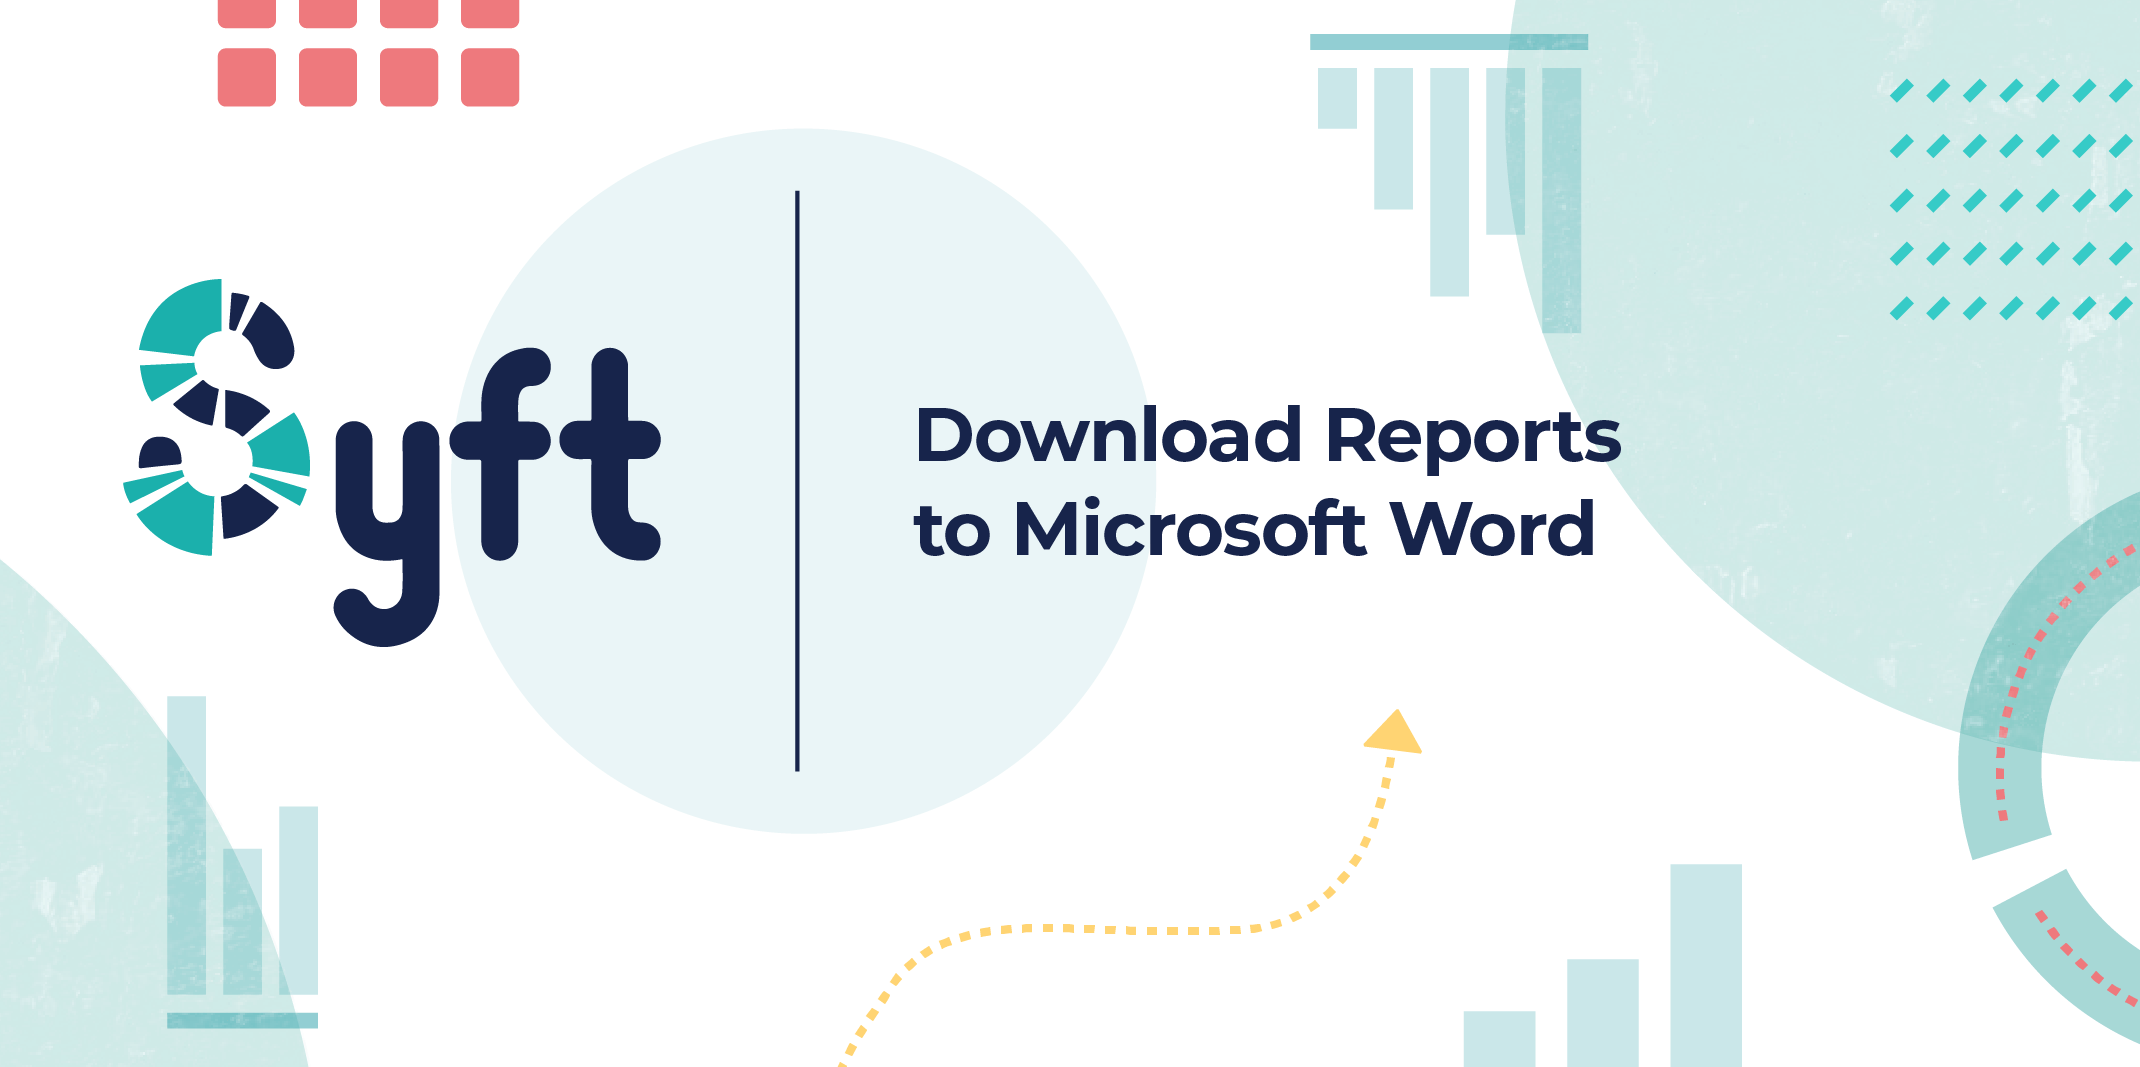 Download Reports to Microsoft Word with Syft image